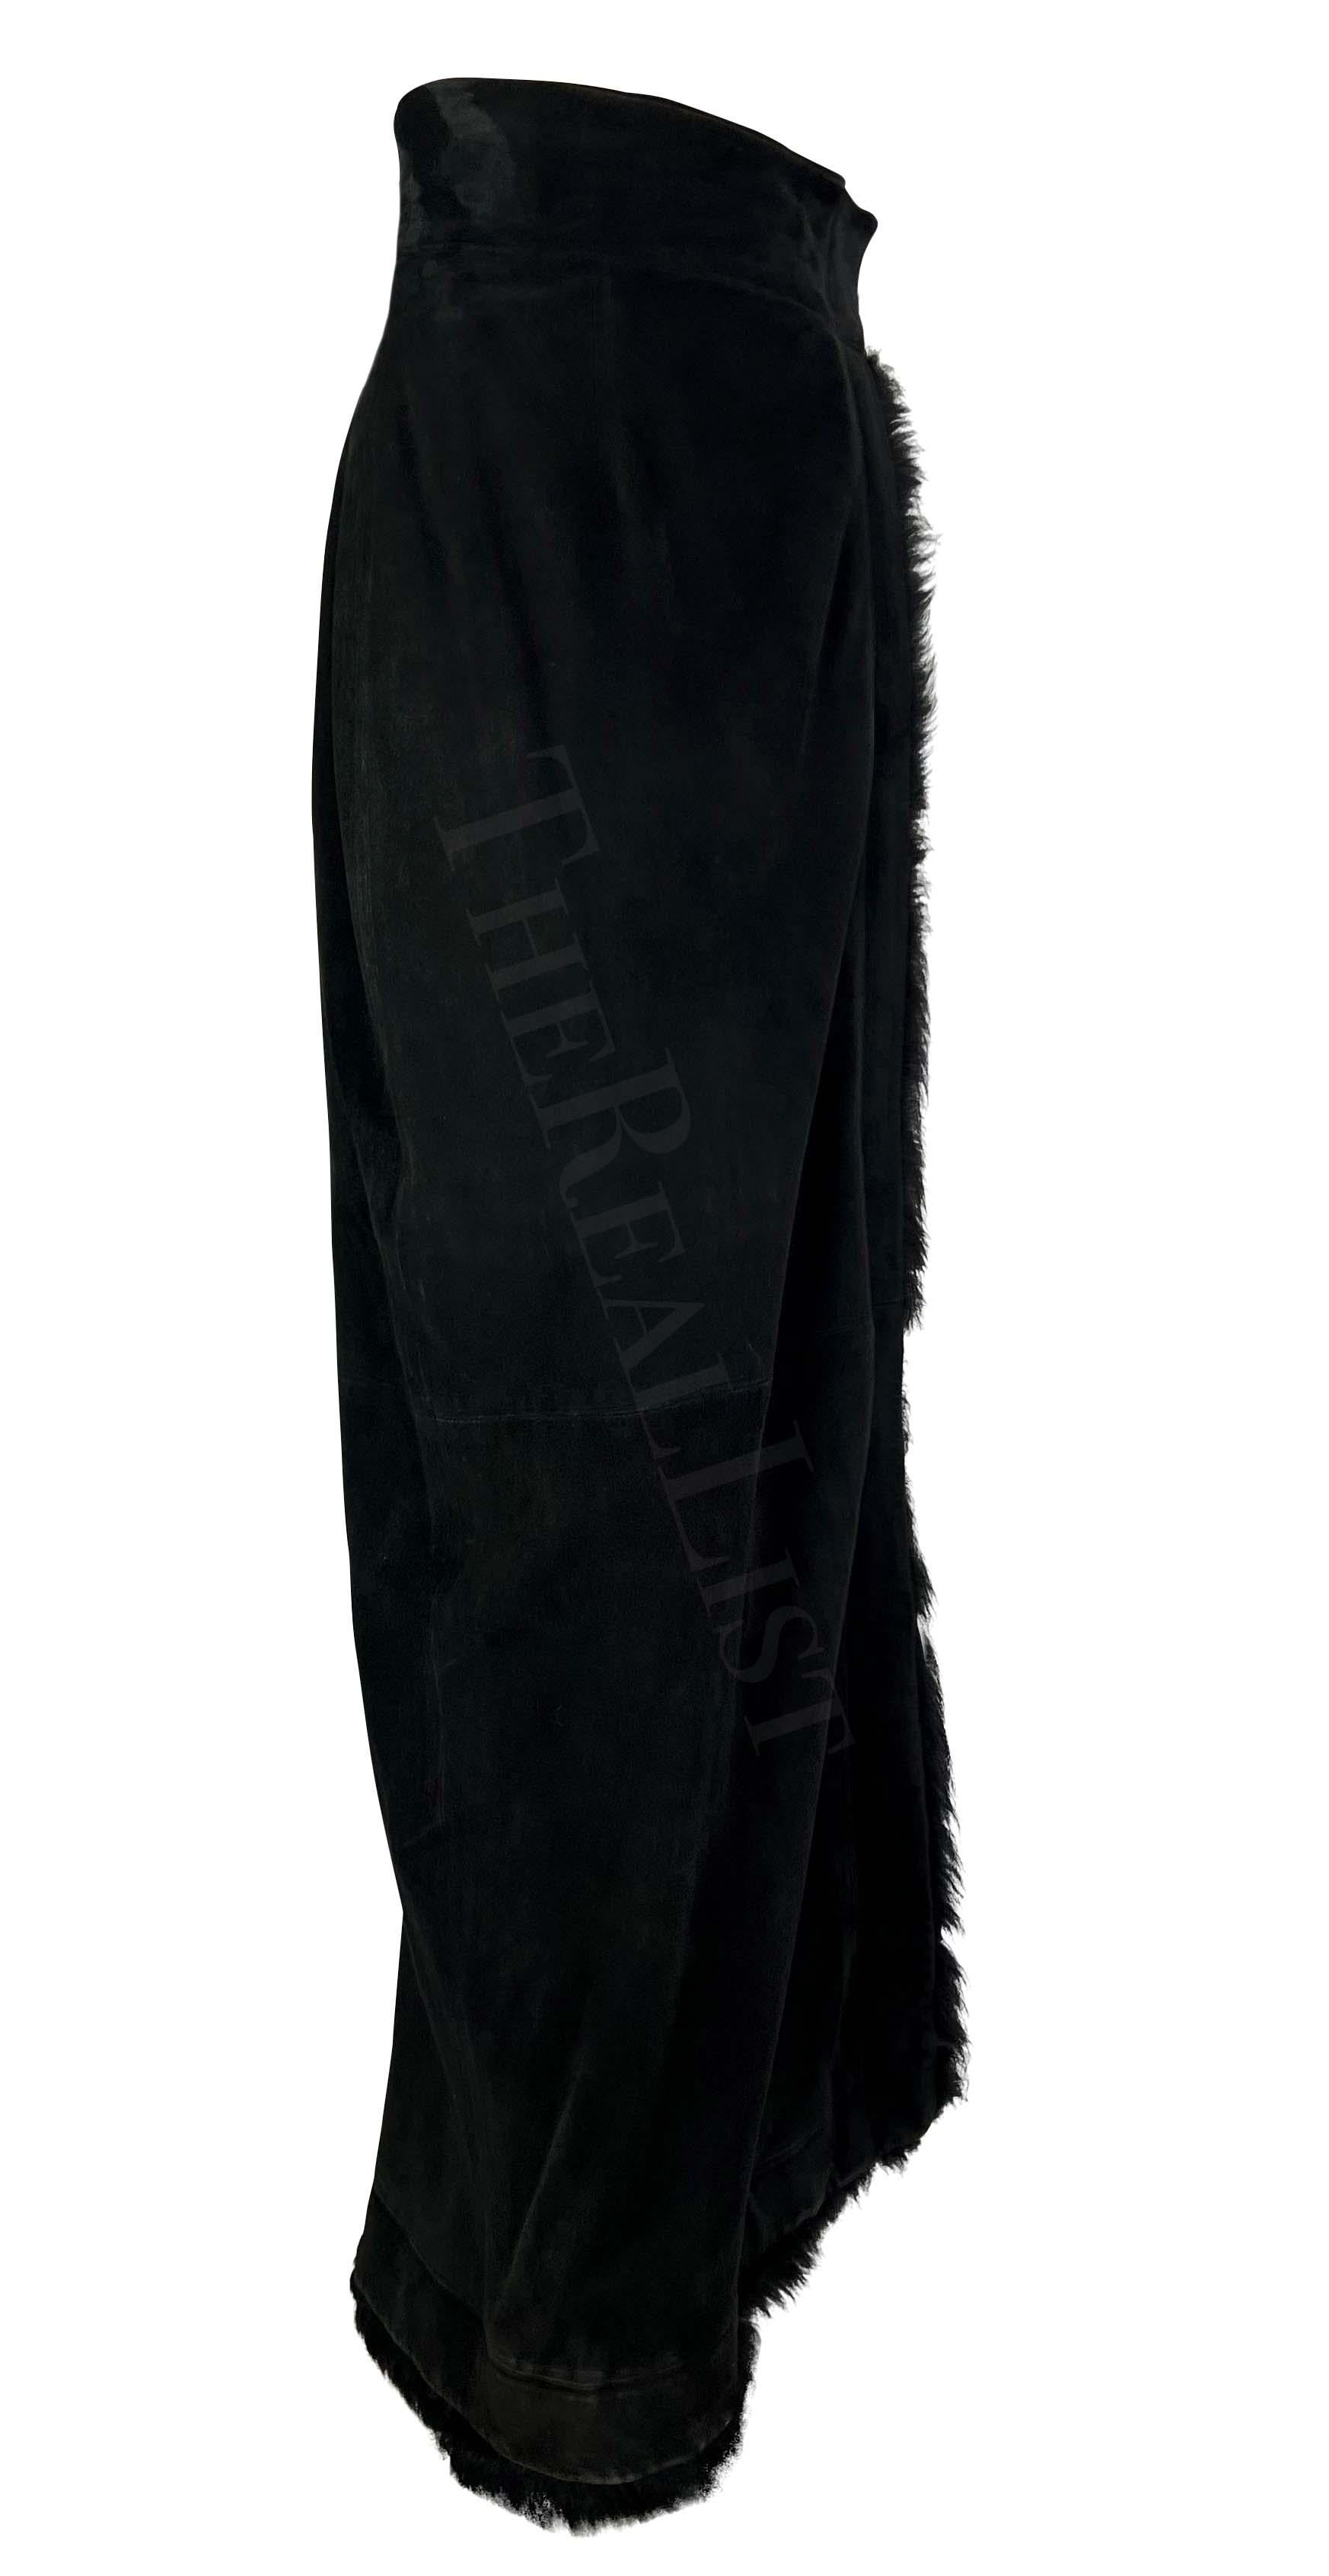 F/W 1996 Gucci by Tom Ford Runway Black Suede Fur Wrap Maxi Slit Skirt For Sale 6